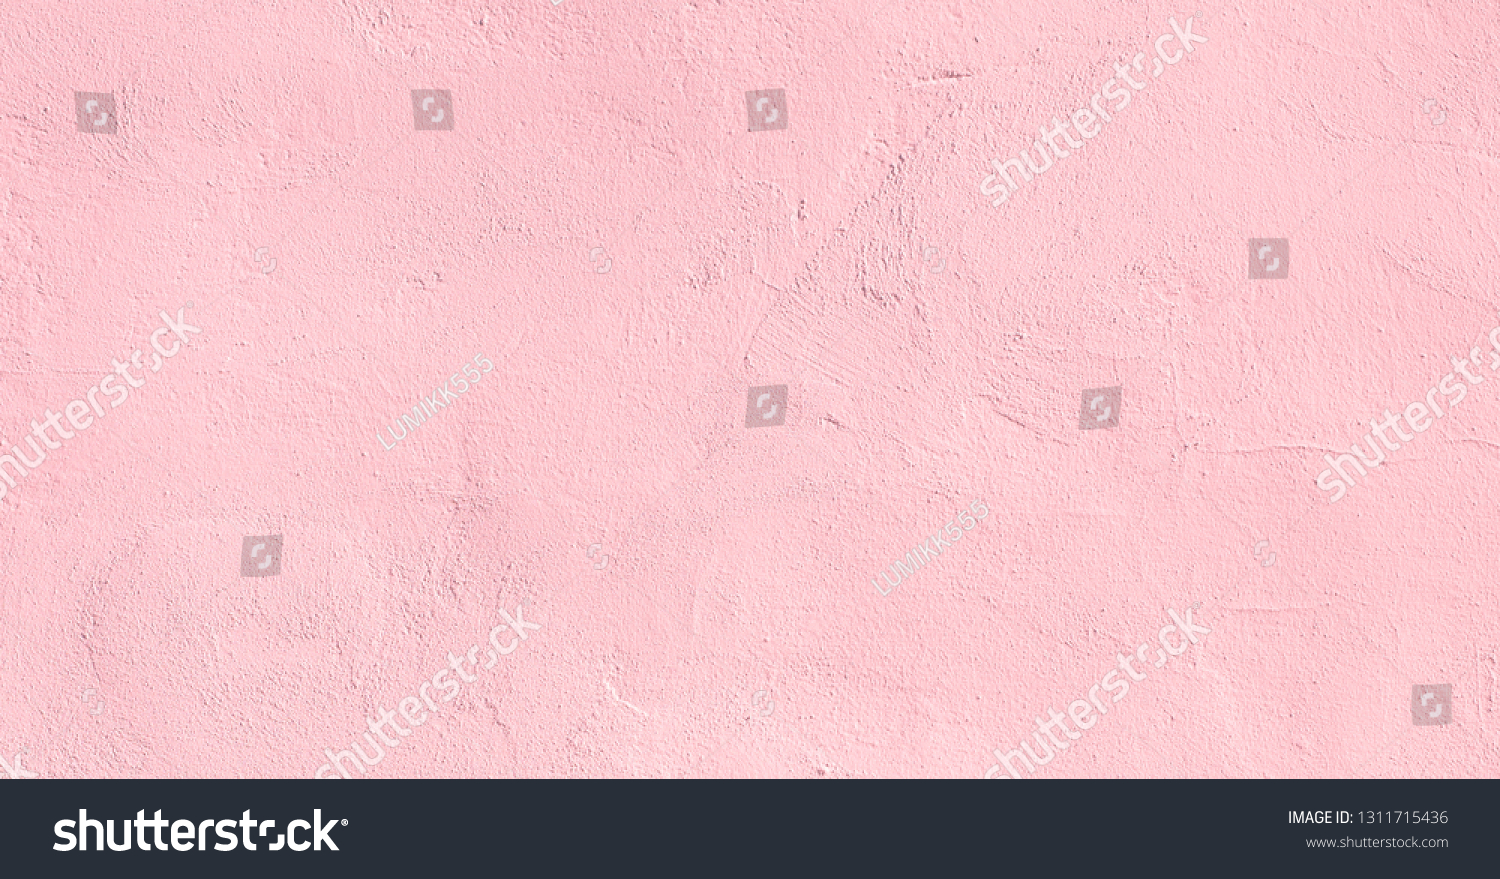 Vintage light pink plaster Wall Texture. Pastel Background. Abstract Painted Wall Surface. Stucco Background With Copy Space For design #1311715436